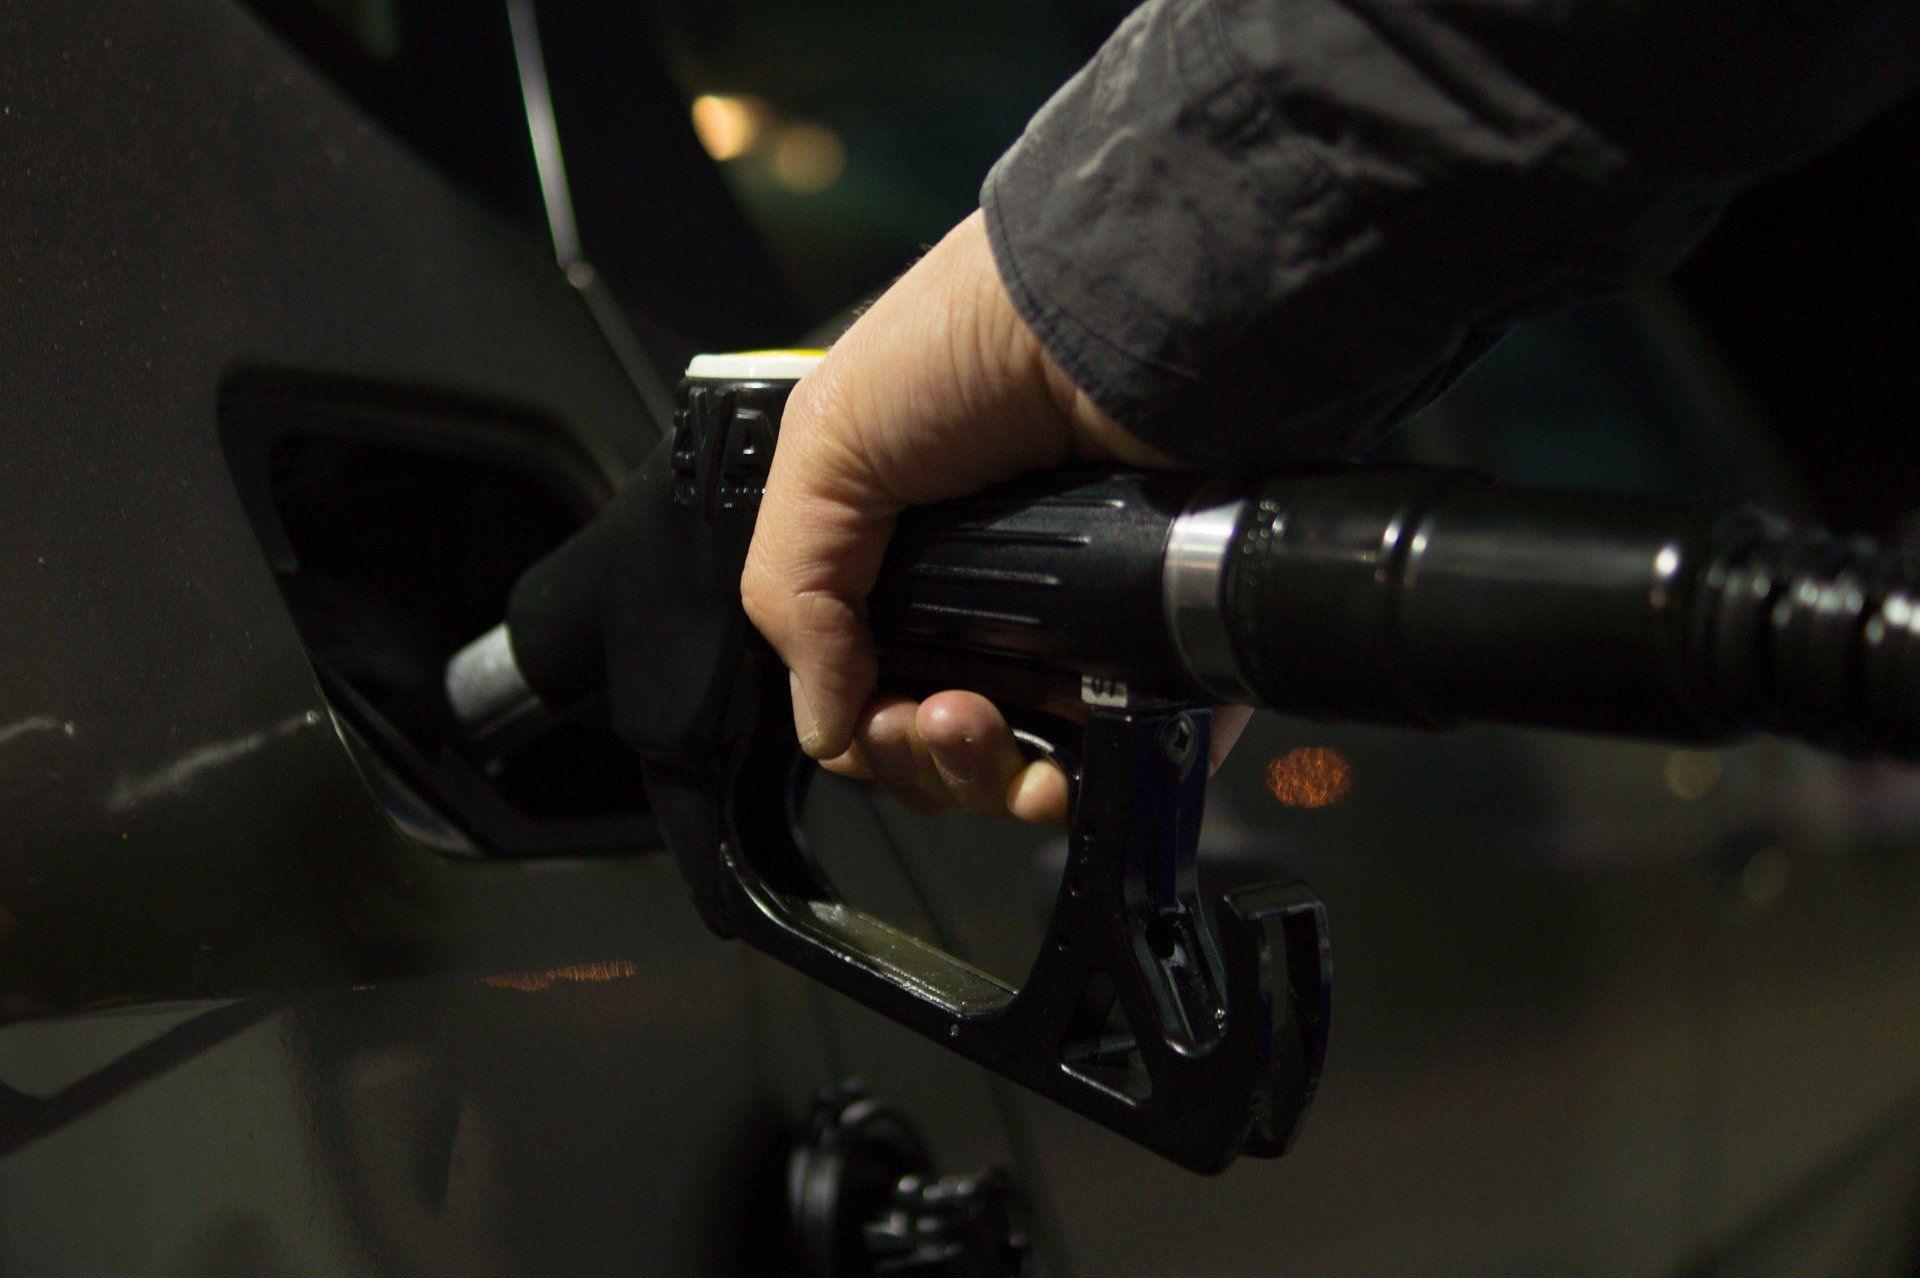 Fuel prices: Petrol priced at Rs 97.01, diesel Rs 88.27 in Delhi on March 23, 2022